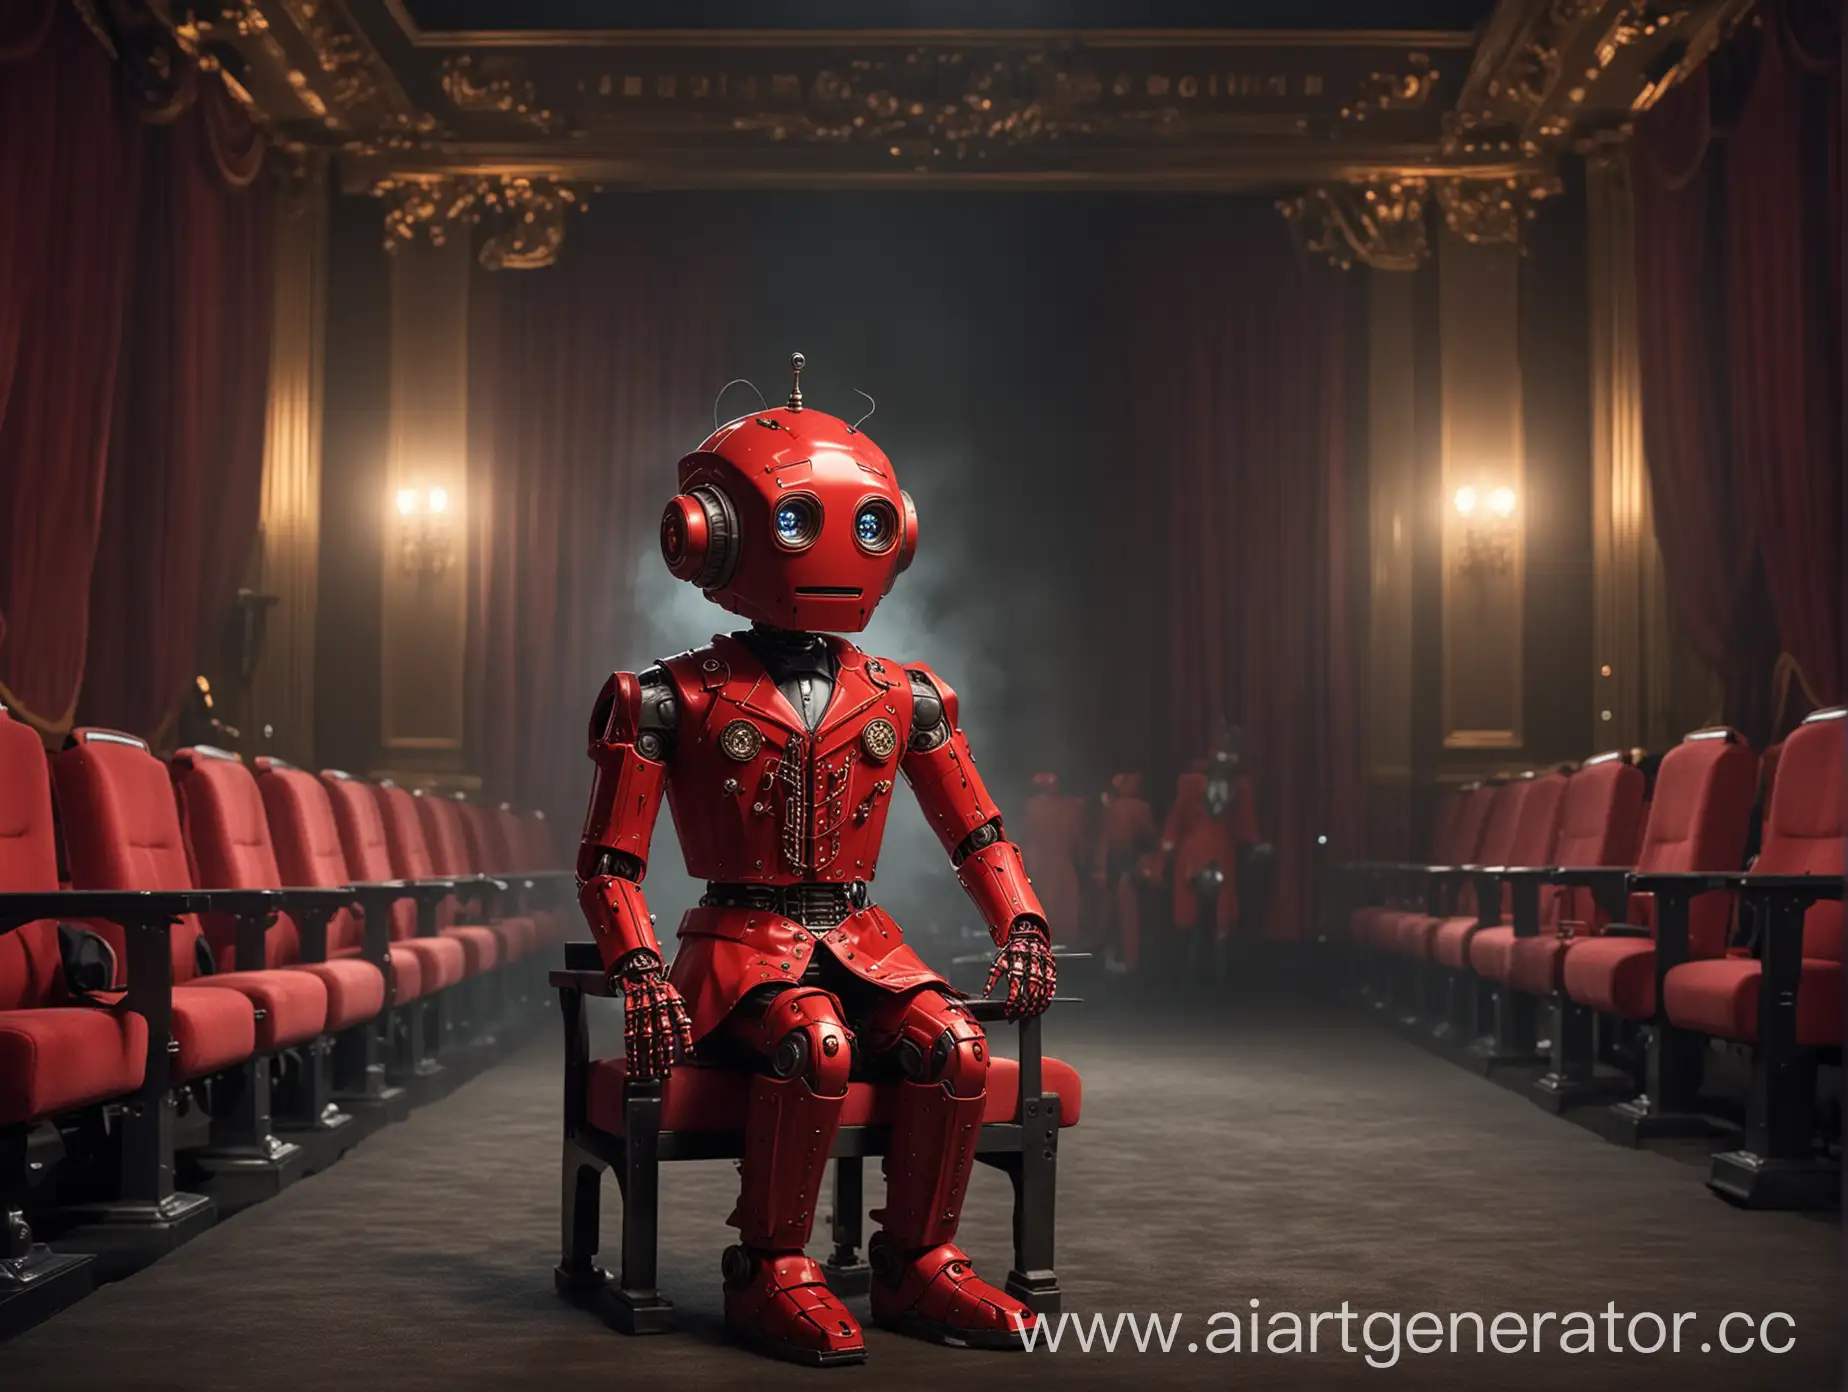 Luxurious-Theater-Scene-Red-Robot-in-Tailcoat-Watching-Performance